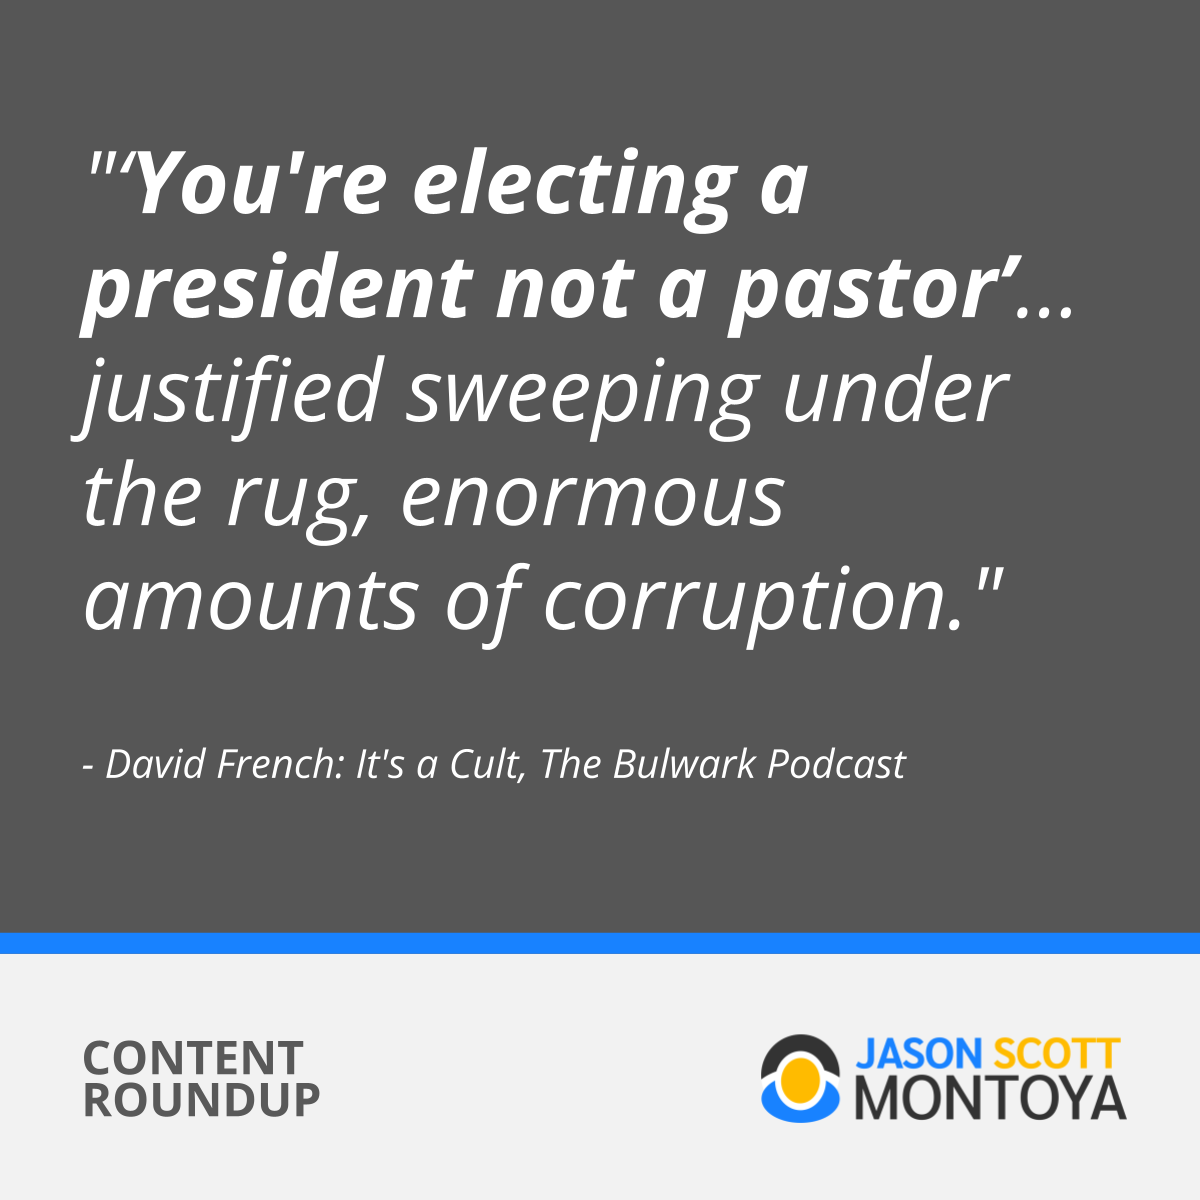 “'you're electing a president not a pastor'… has justified sweeping under the rug enormous amounts of corruption." - David French